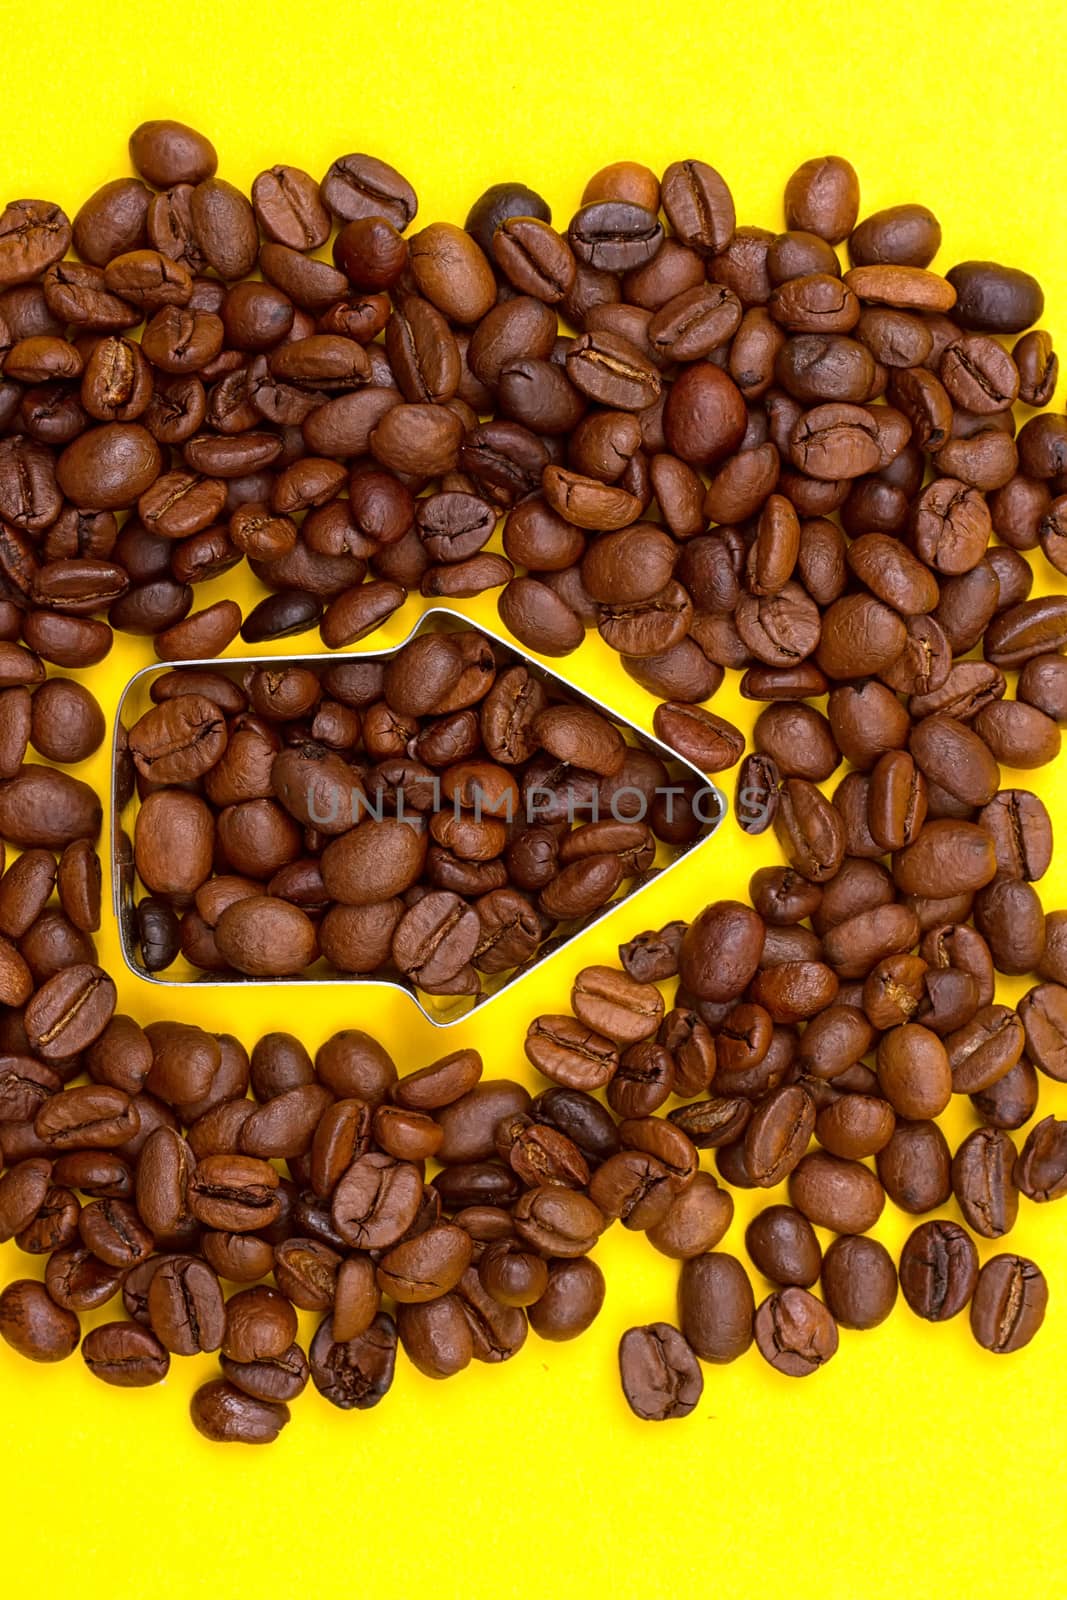 Right arrow of coffee beans on the yellow background